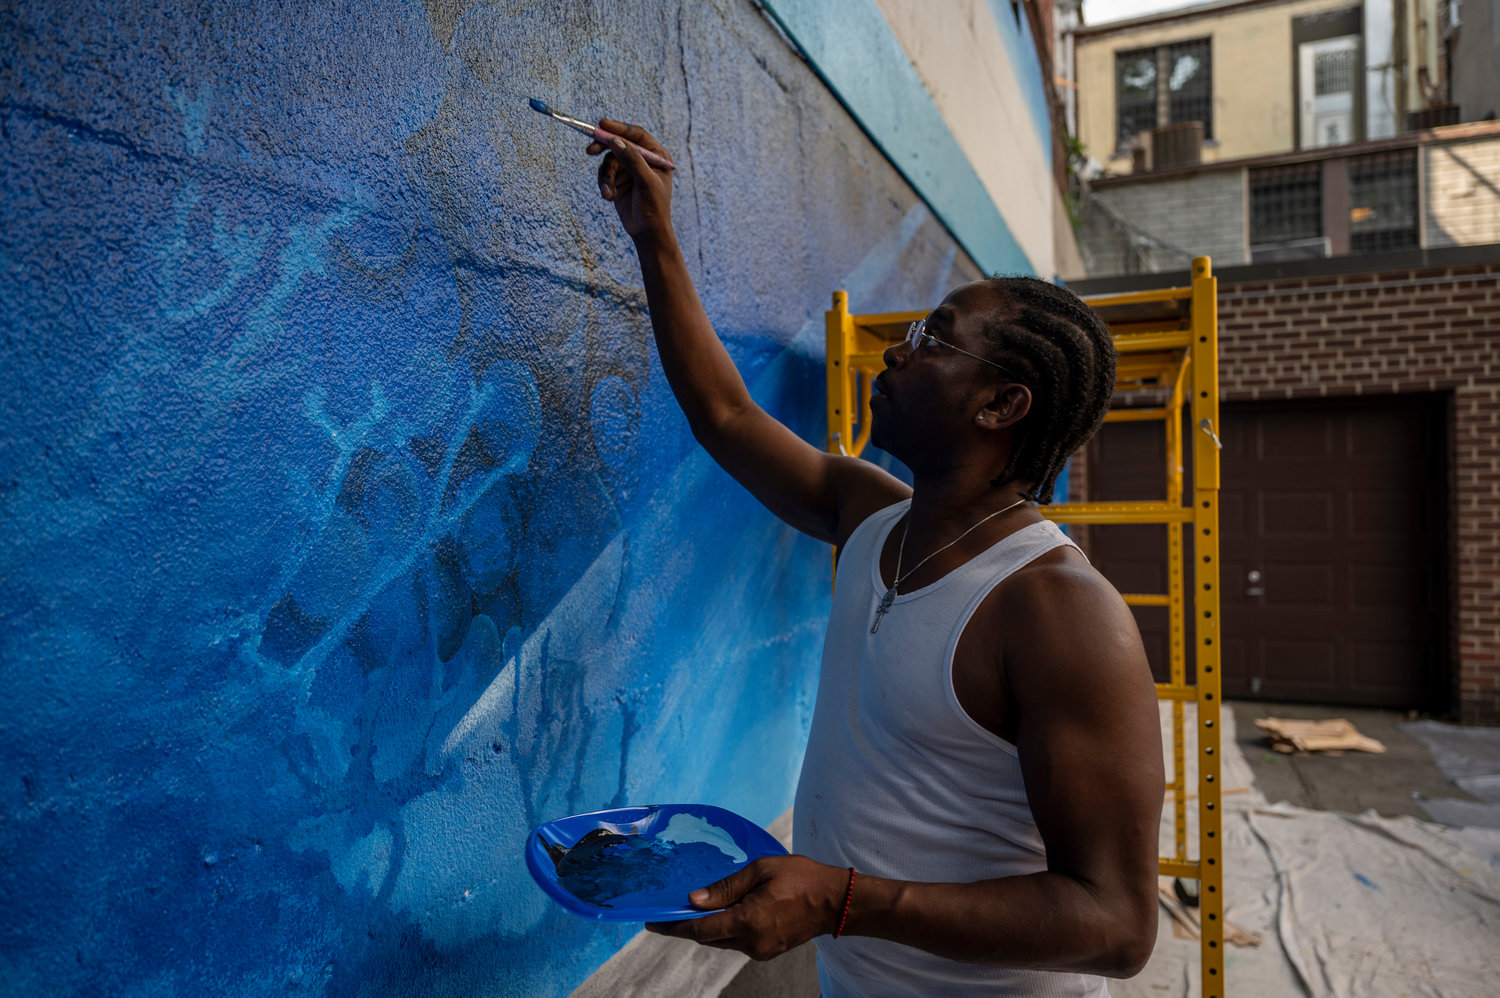 Olugbala Williams paints a mural on the back retaining wall of 3636 Greystone Ave. Nicky Enright was commissioned to paint this mural, ‘Aquarium,’ by his building’s co-op board because he’s no stranger to mural painting.